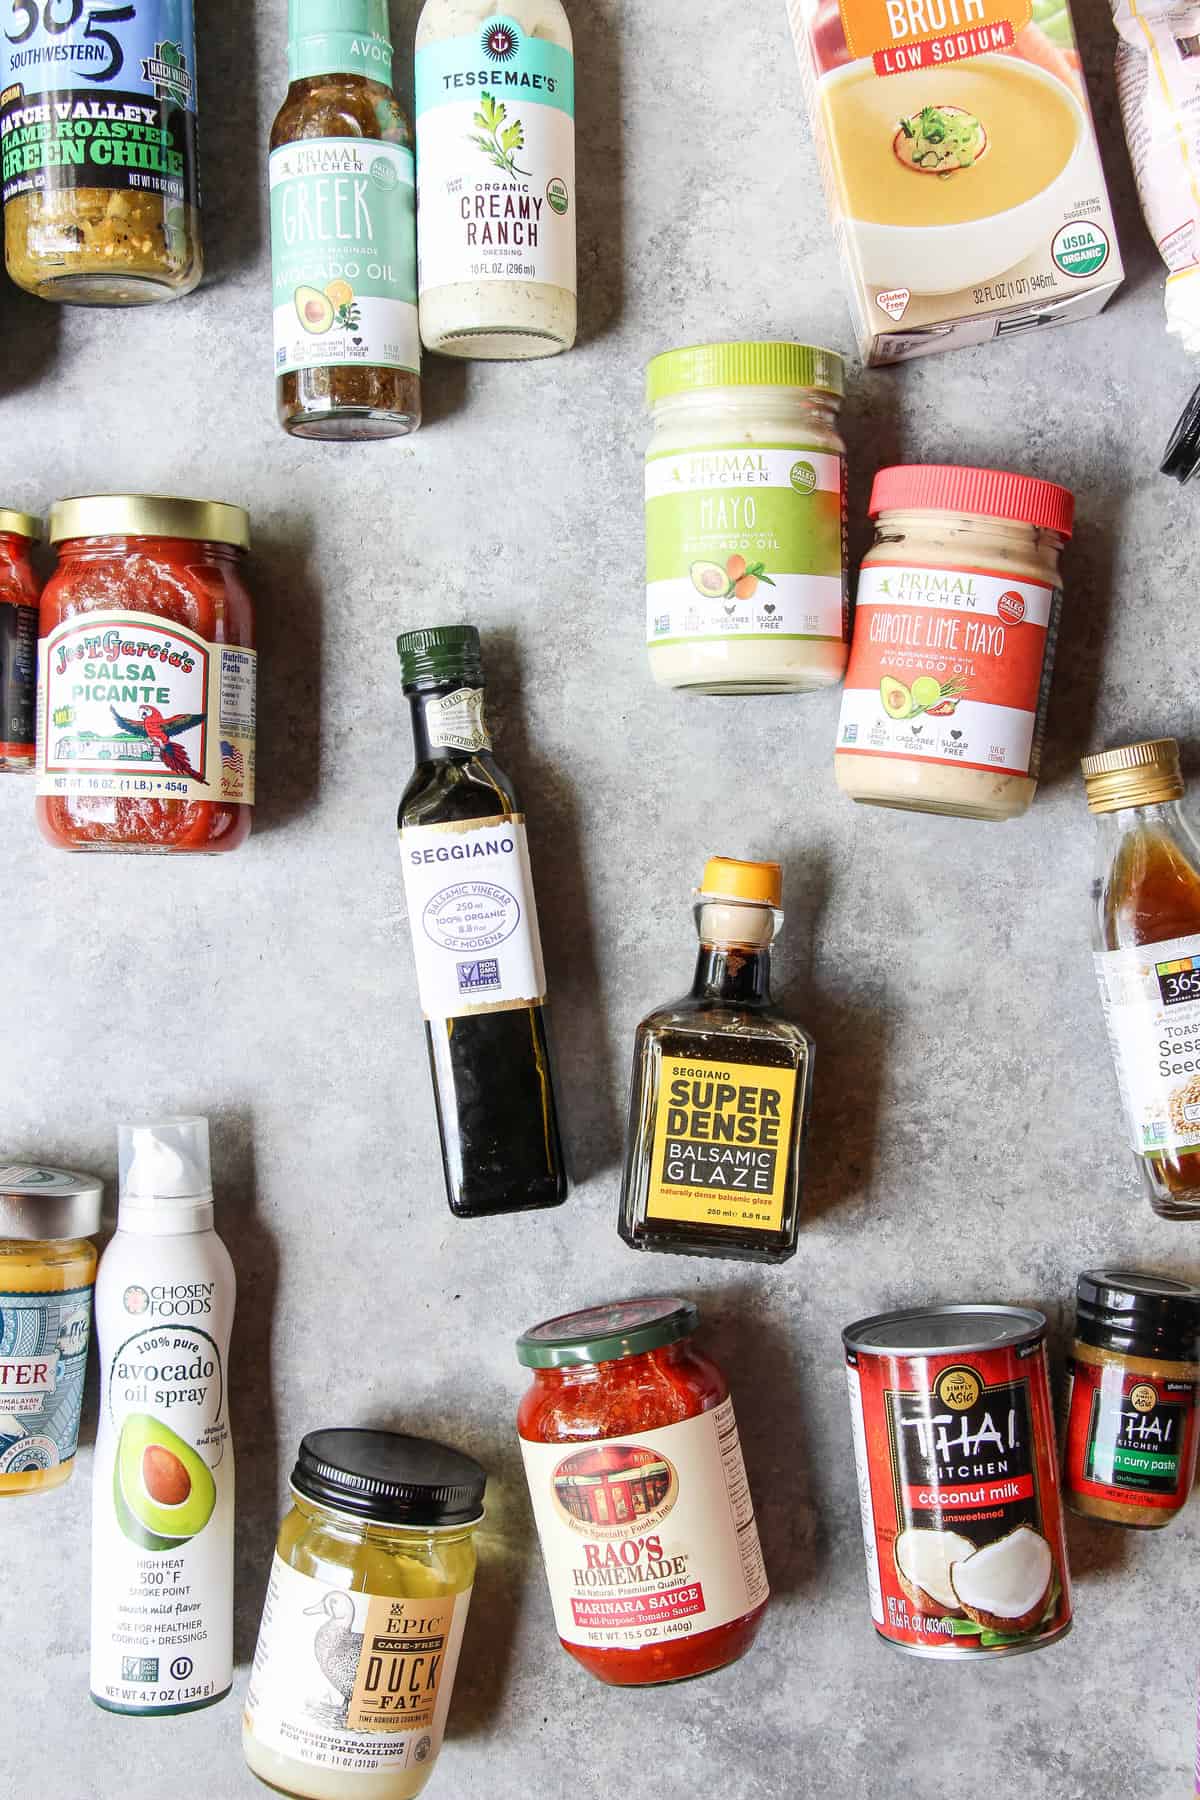 Whole30 Approved Products I LOVE. - The Defined Dish